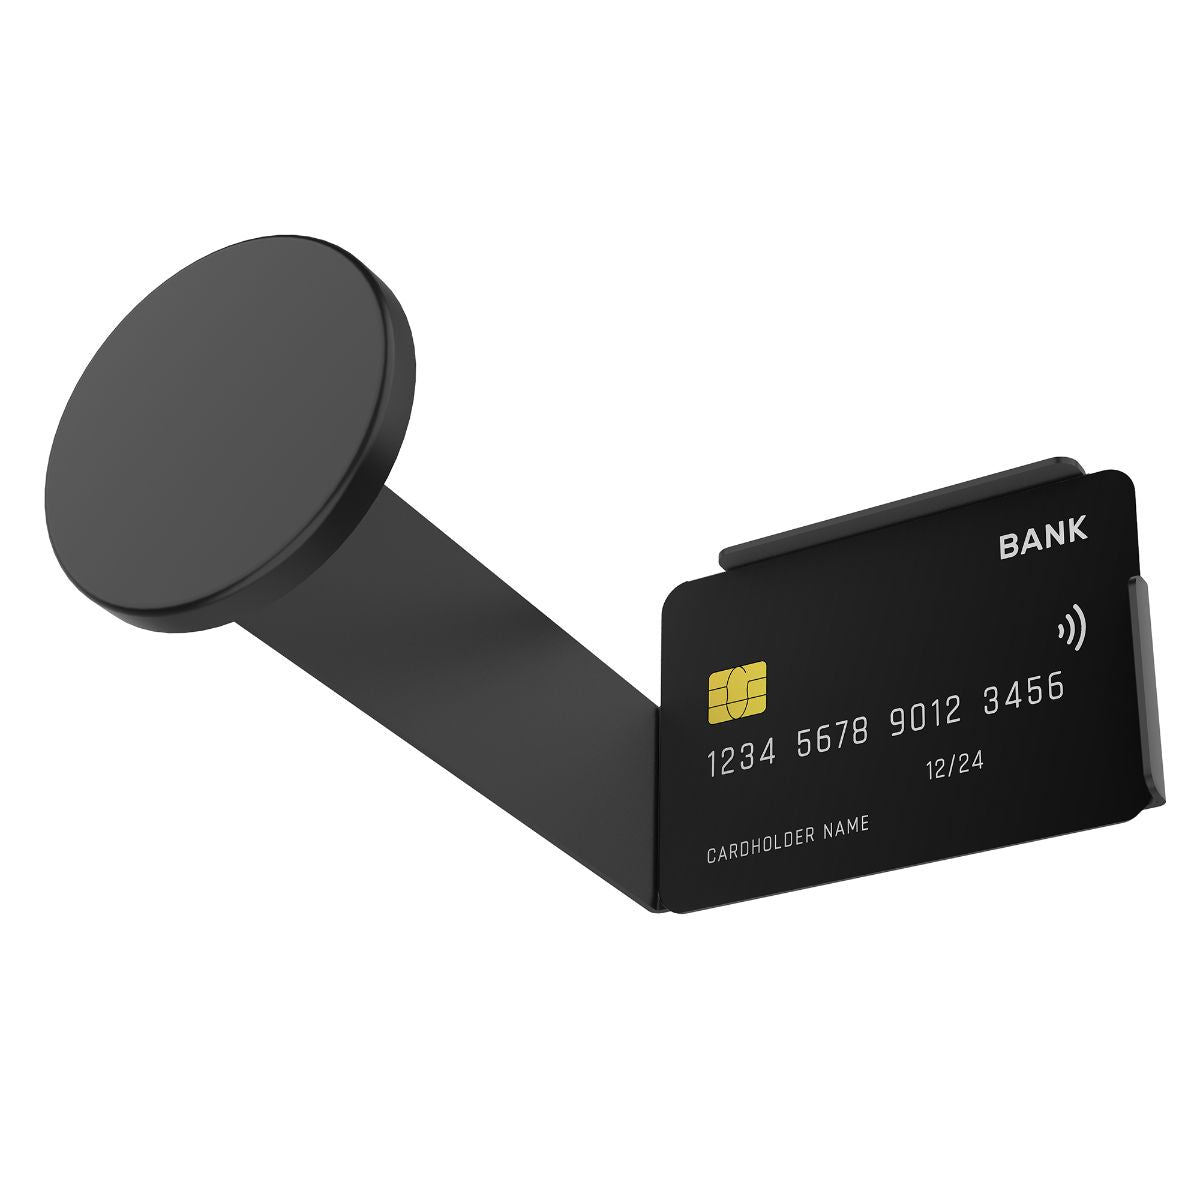 ID and Card Holder with Magnetic Attachment for Card Scanning